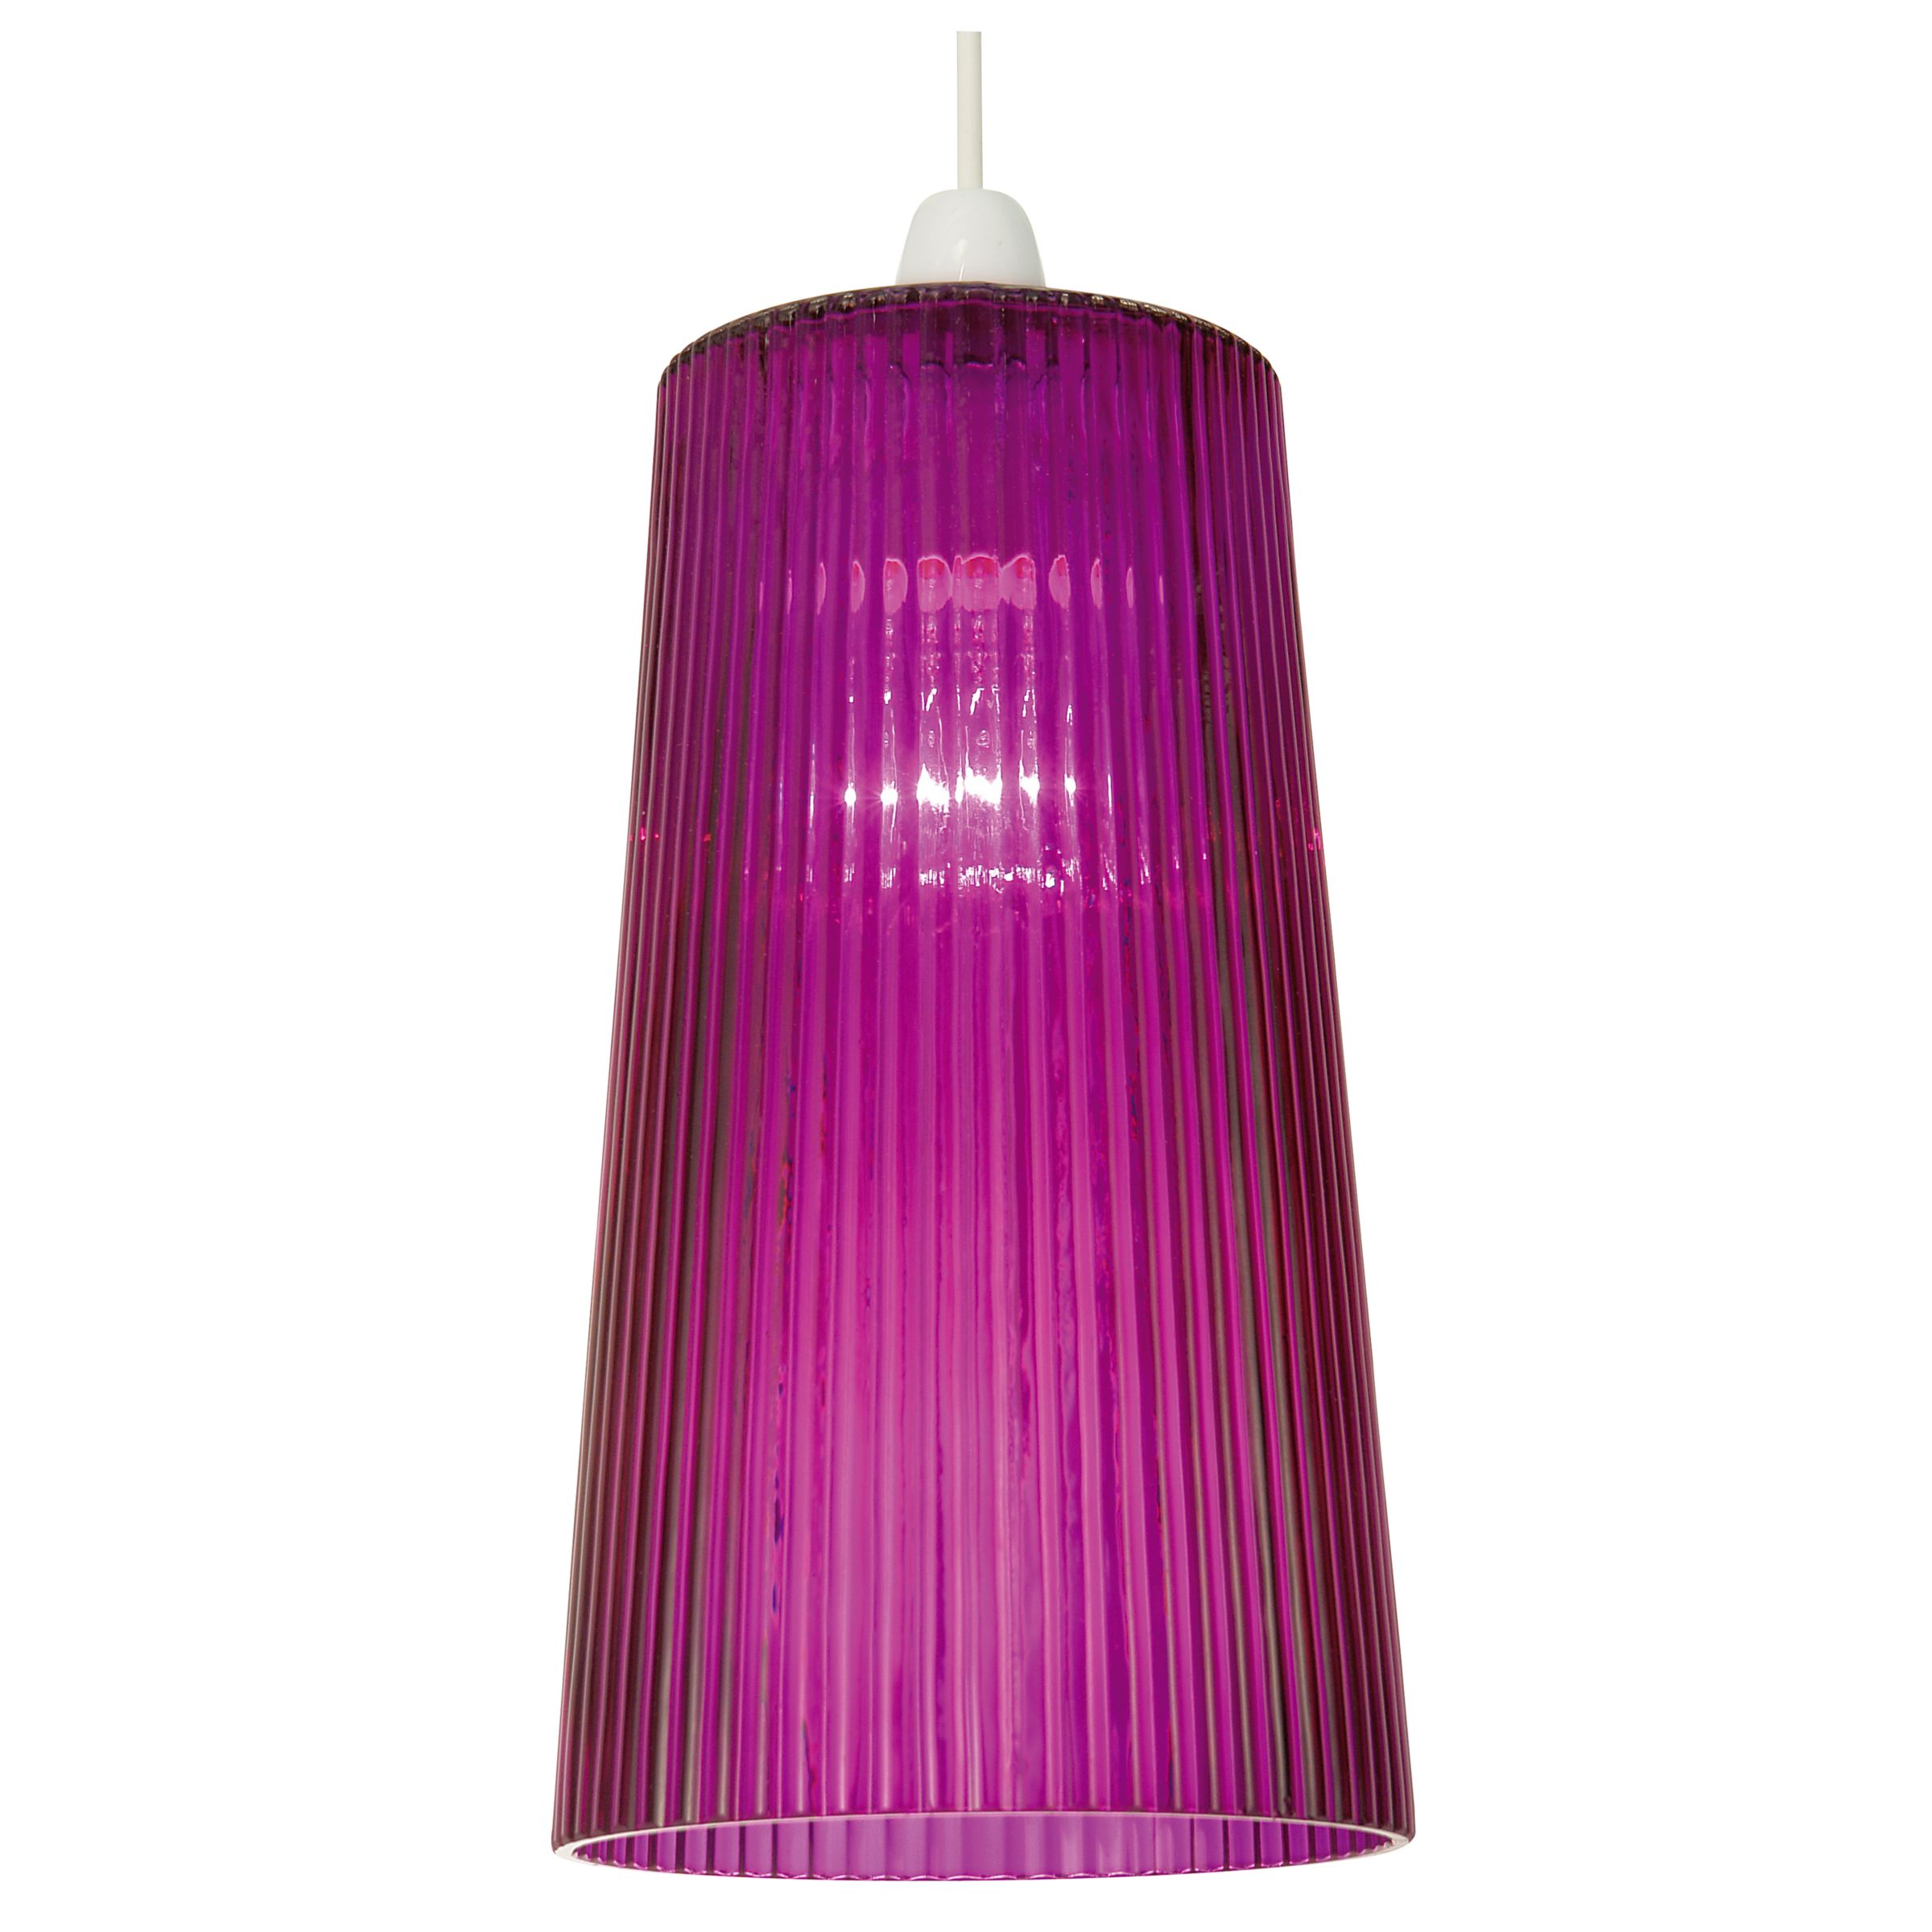 John Lewis Ribbed Glass Ceiling Light, Pink